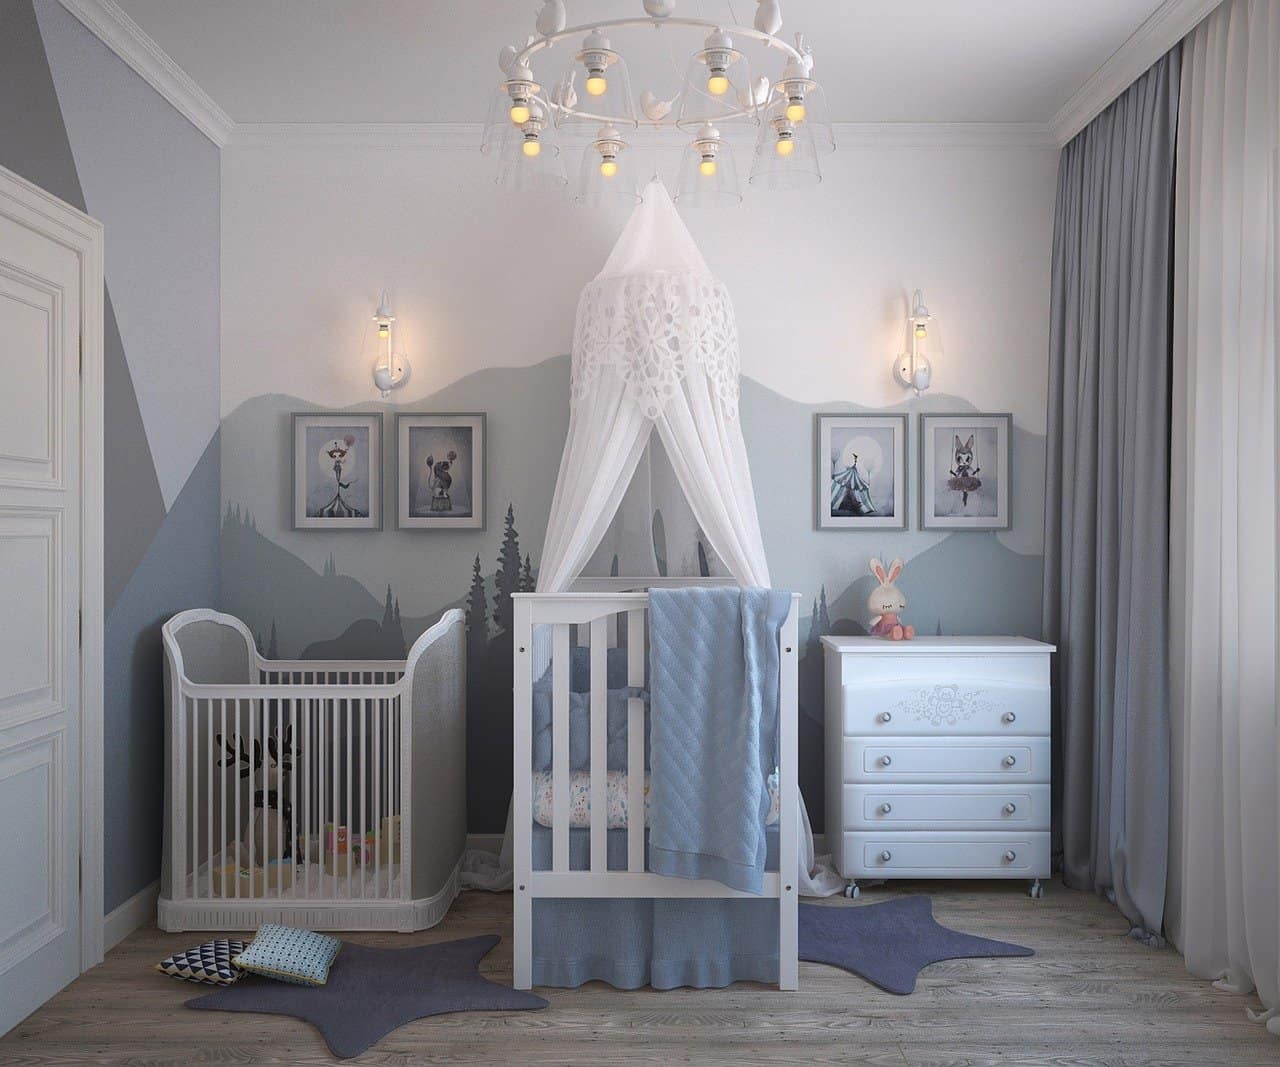 What colors to bet on in a child’s room?